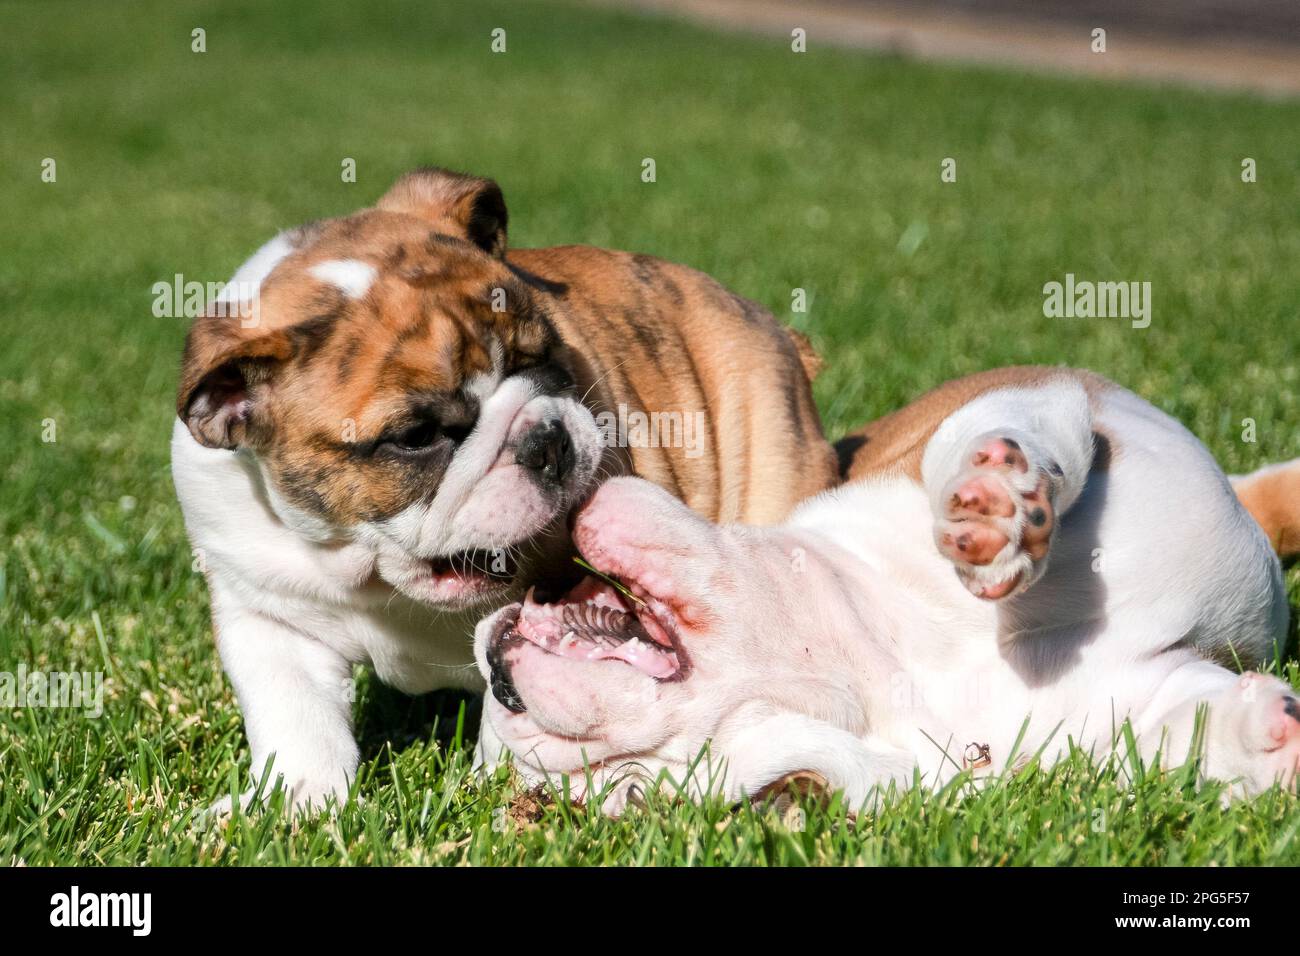 Two bulldog puppies rolling and playing in the grass Stock Photo